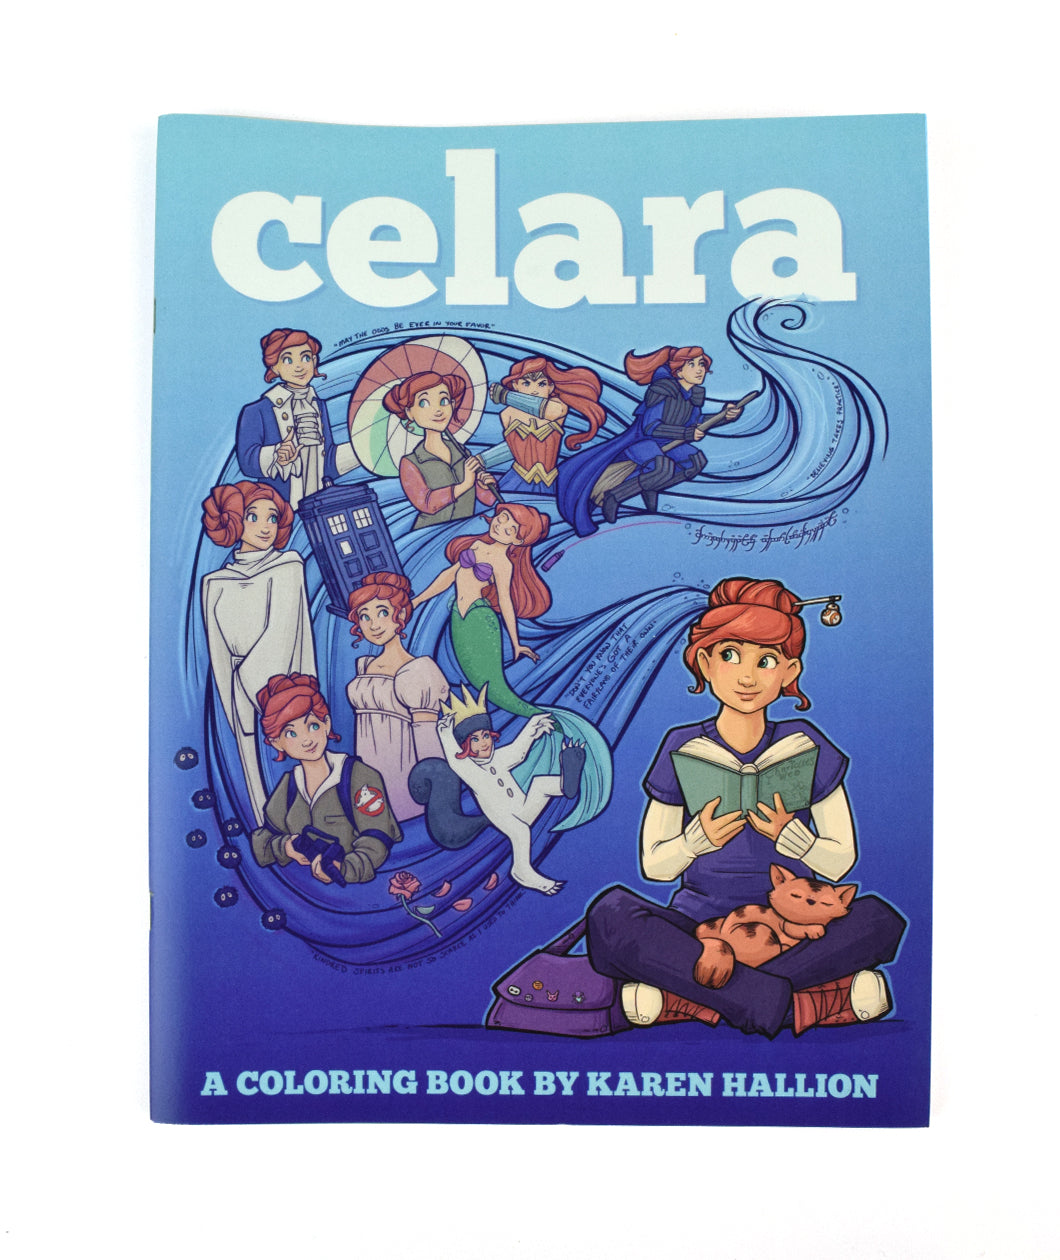 A coloring book by Karen Hallion. The cover is titled "Celara" and depicts a girl reading and picturing herself in fairytales. 